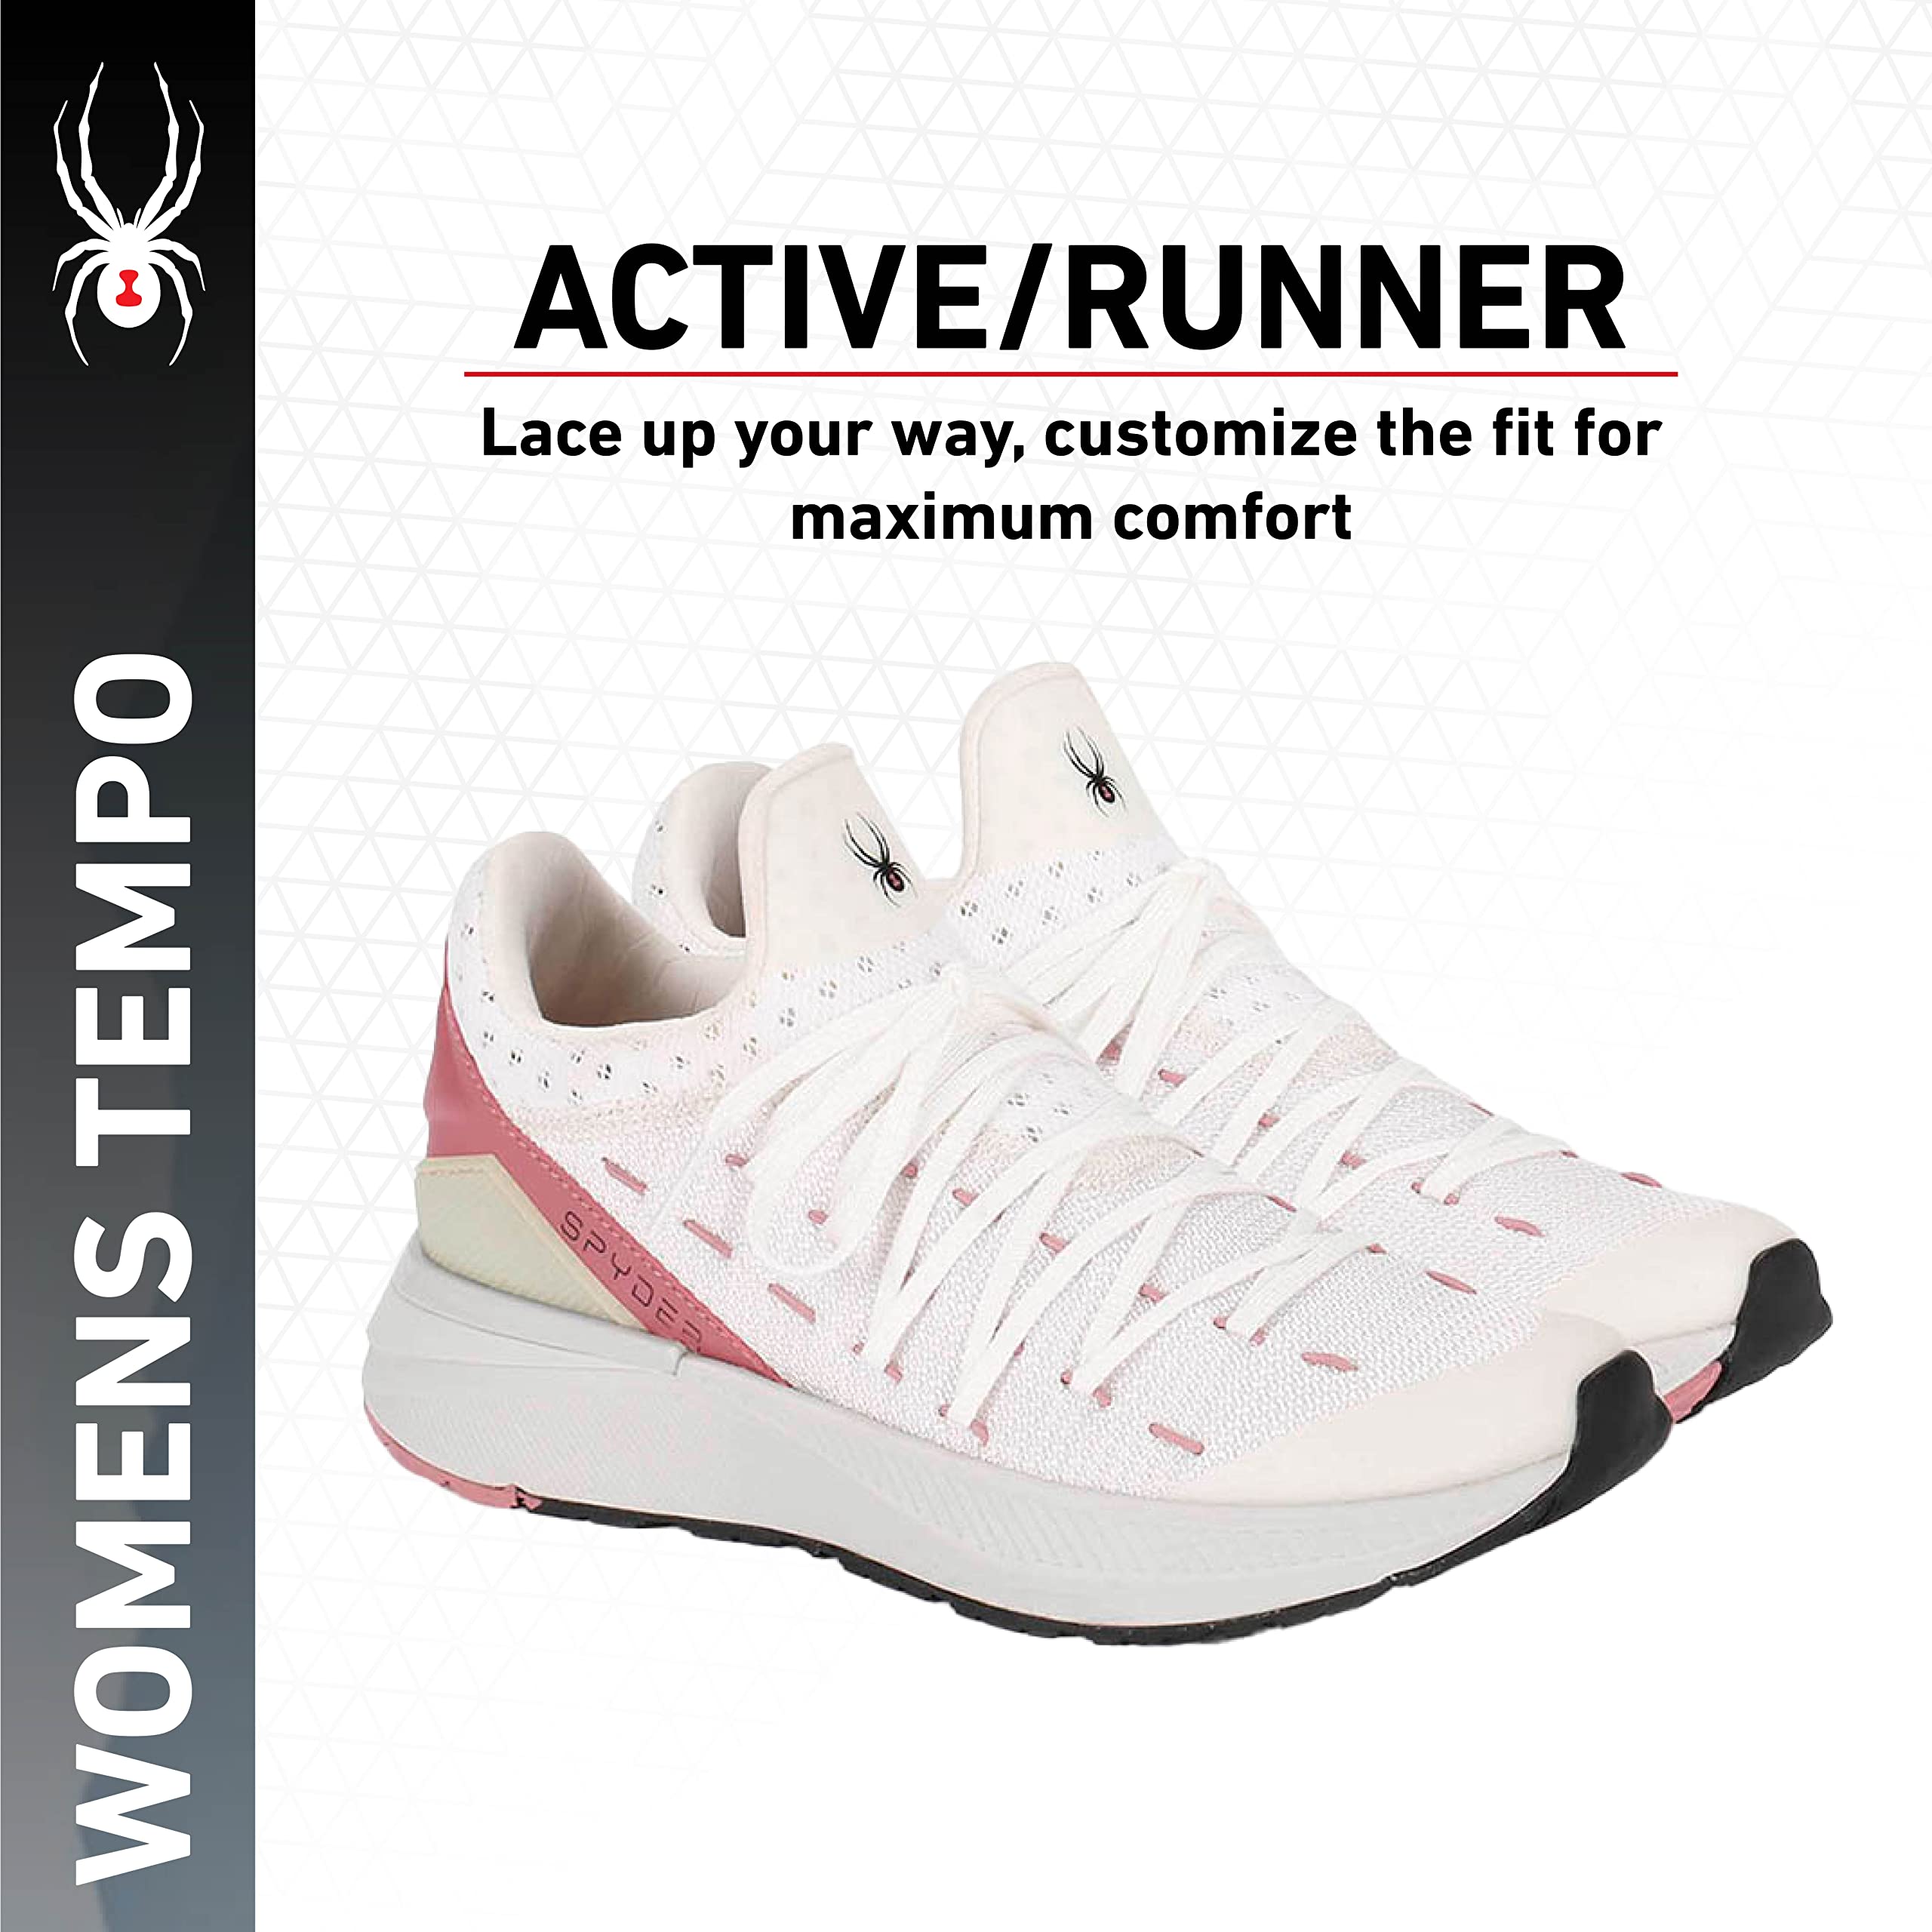 Spyder Women's Road Running Shoes Tempo, White, 8